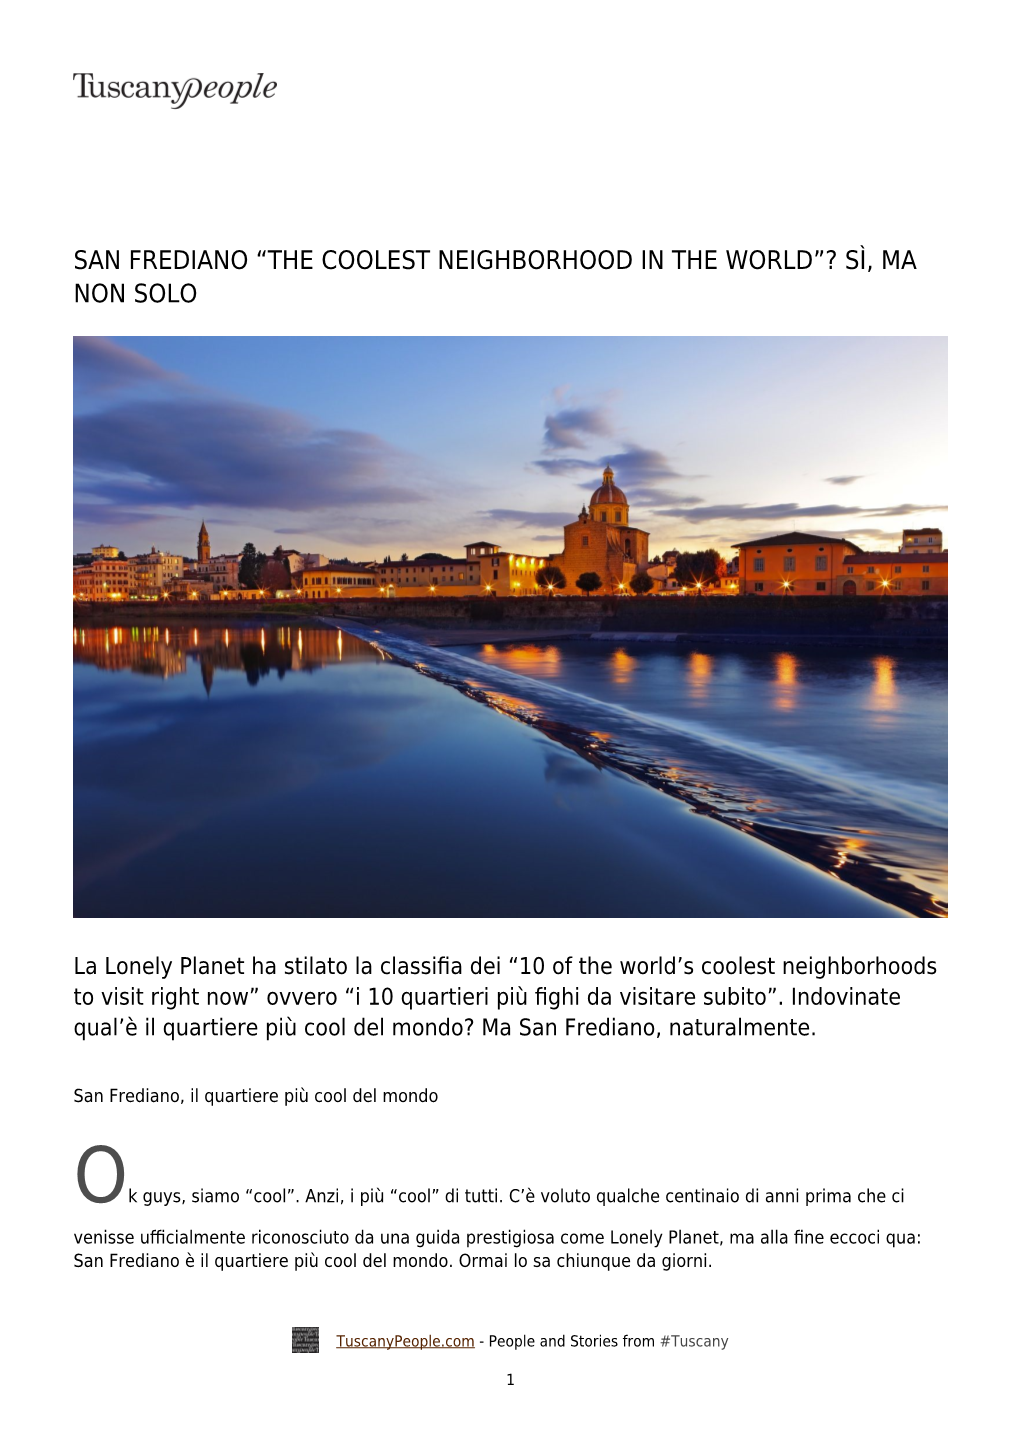 San Frediano “The Coolest Neighborhood in the World”? Sì, Ma Non Solo